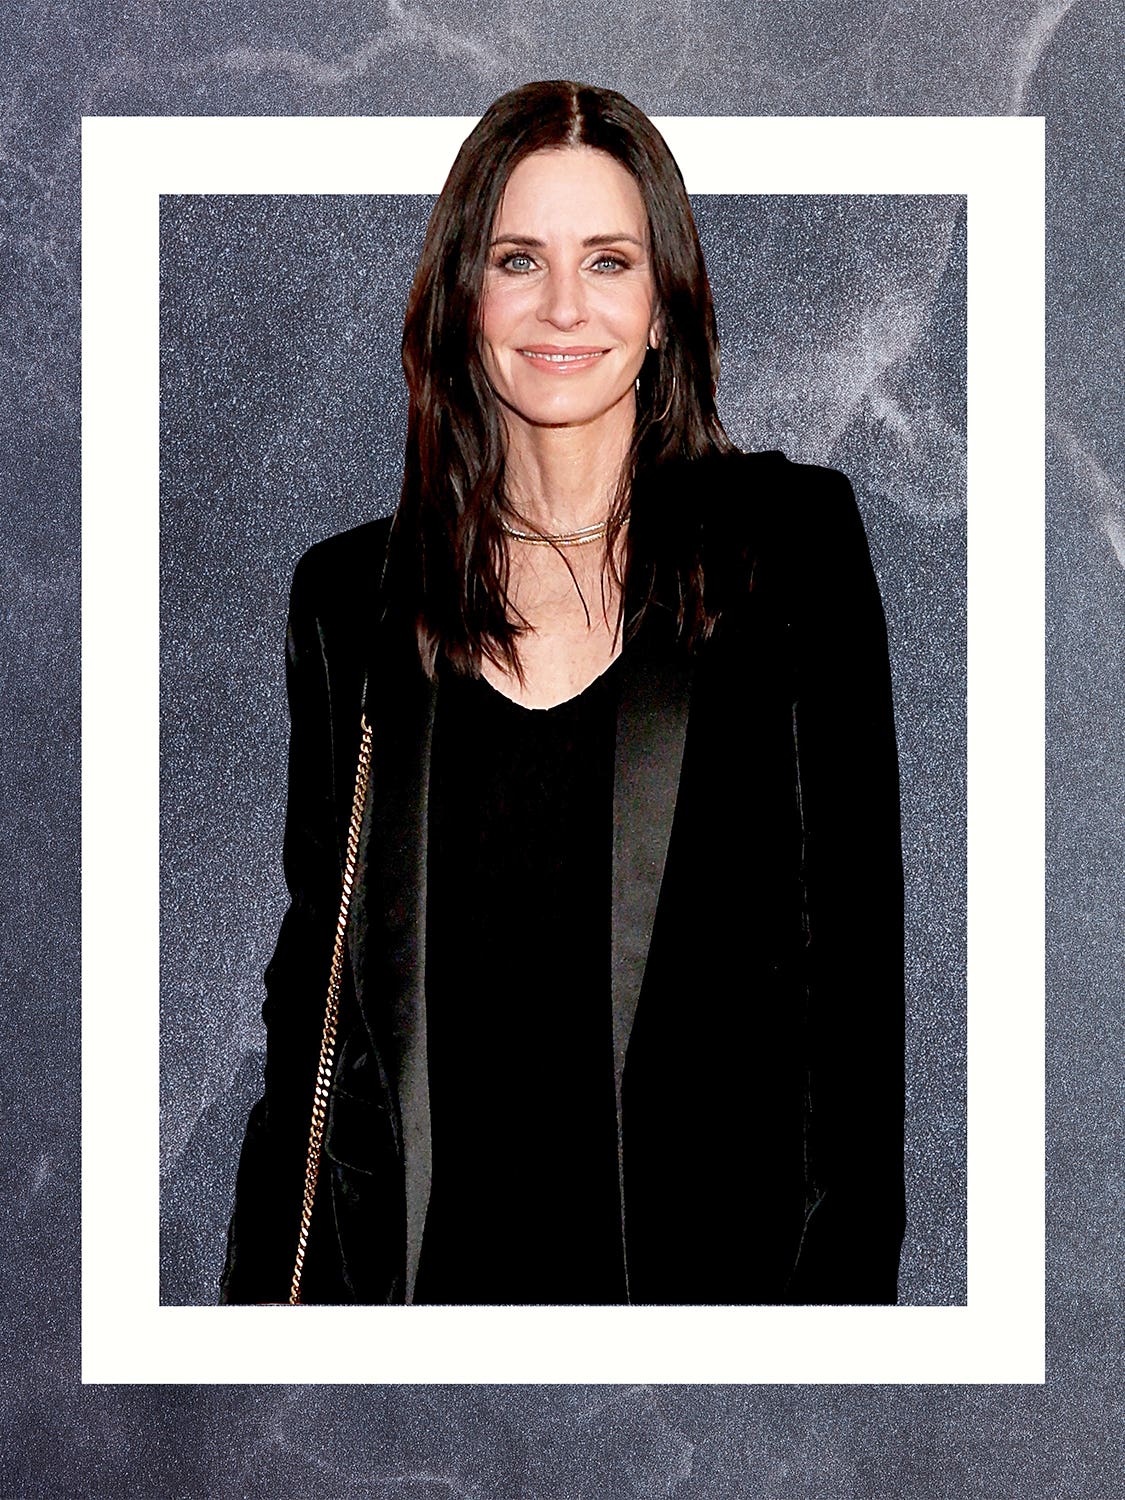 Snag Some of Courteney Cox’s Personal Vintage Scores While You Still Can